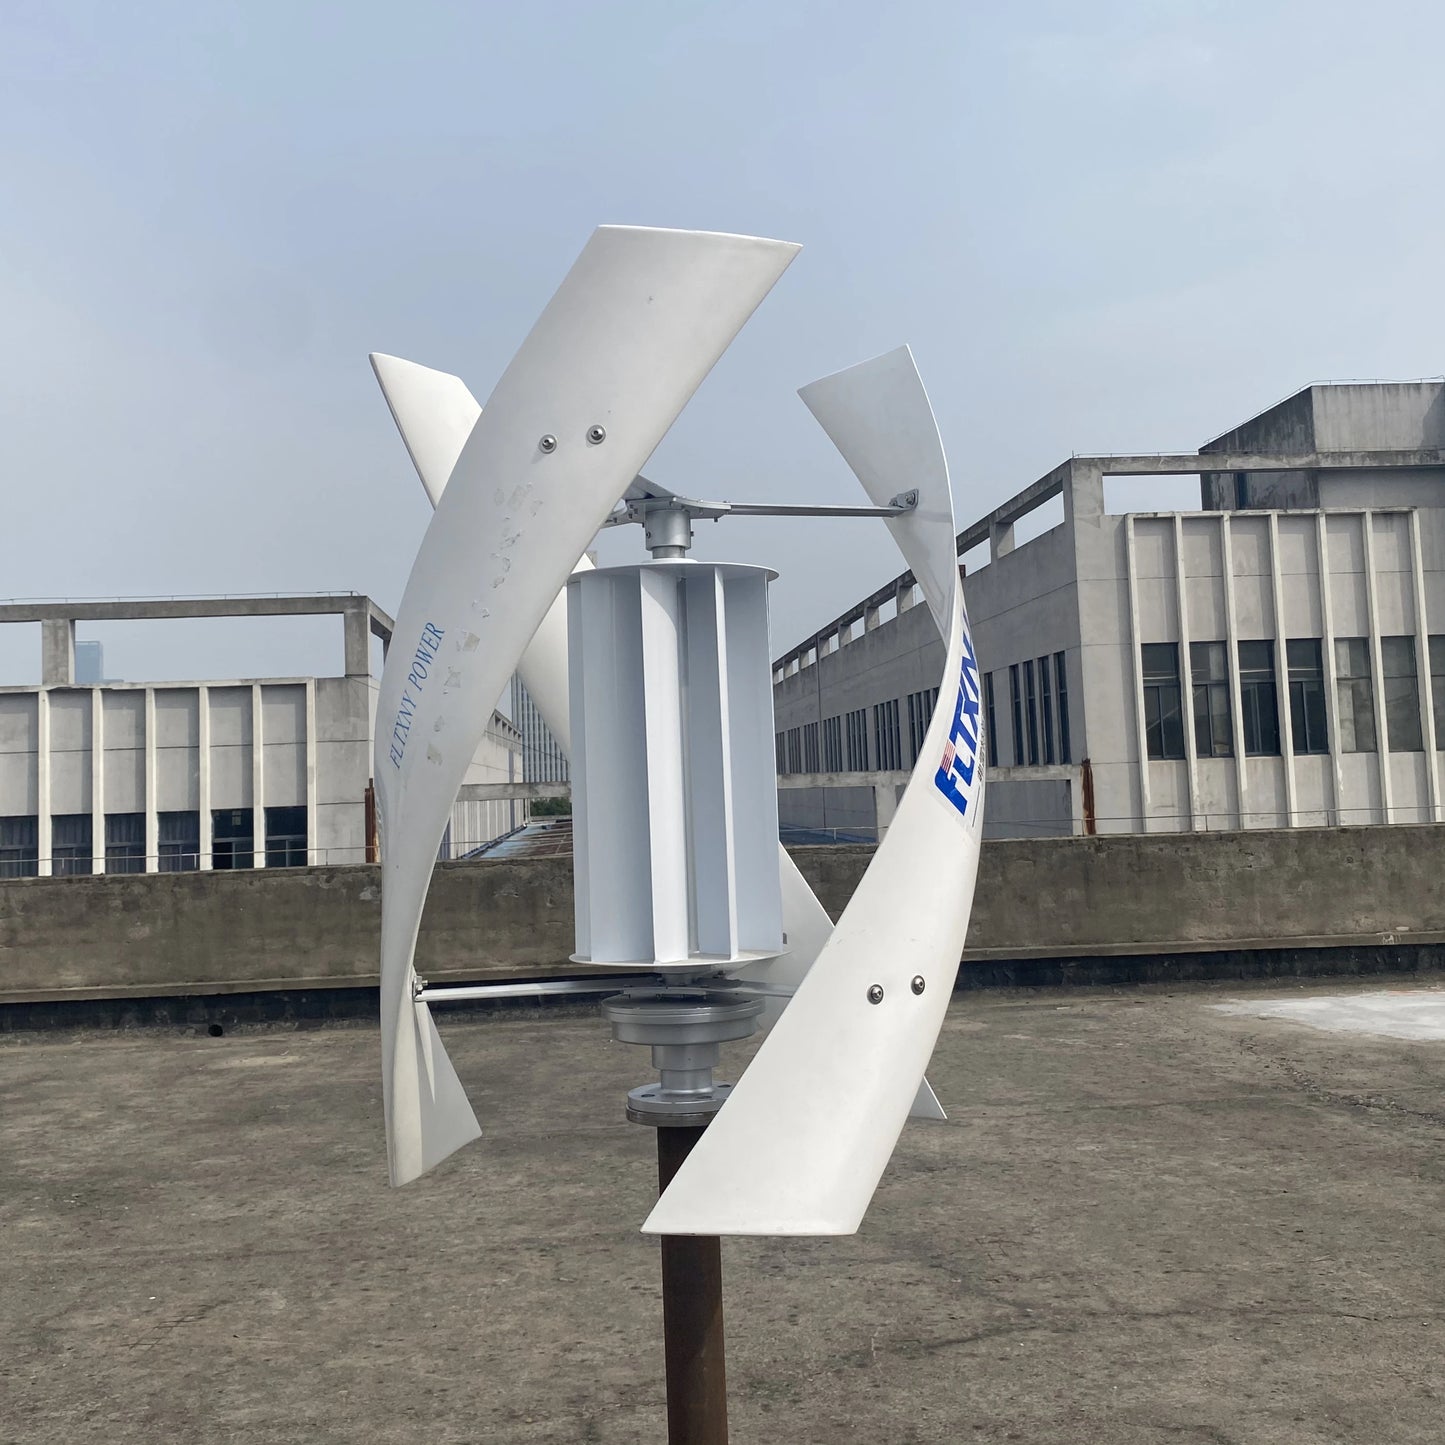 Fltxny Power 1KW 2KW 3KW 3 Blades Free Energy Vertical Axis Wind Turbine Generator 24V 48V Homeuse Low RPM Windmill